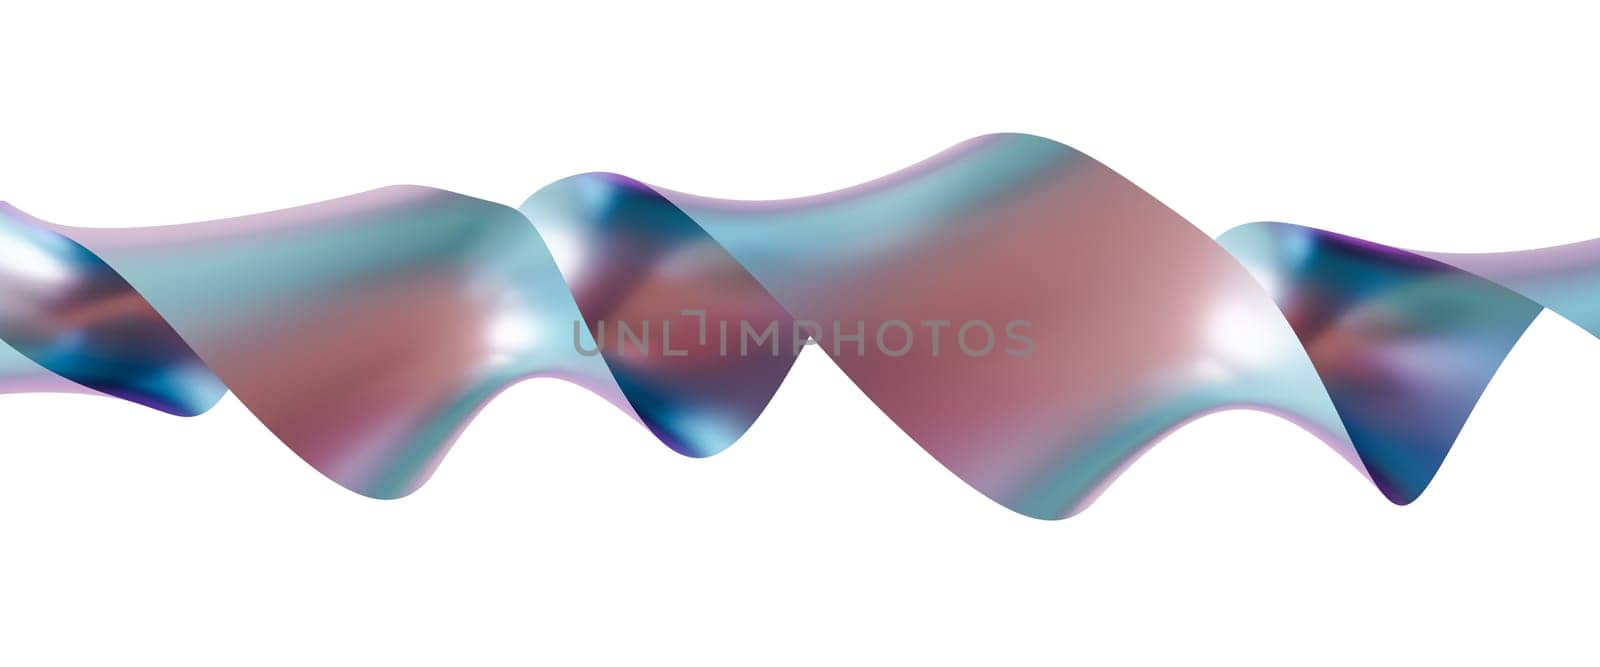 Abstract, holographic 3D shape isolated on white background. Metallic, iridescent surface. Color gradient, y2k style. Cut out trendy and futuristic design element. 3D rendering